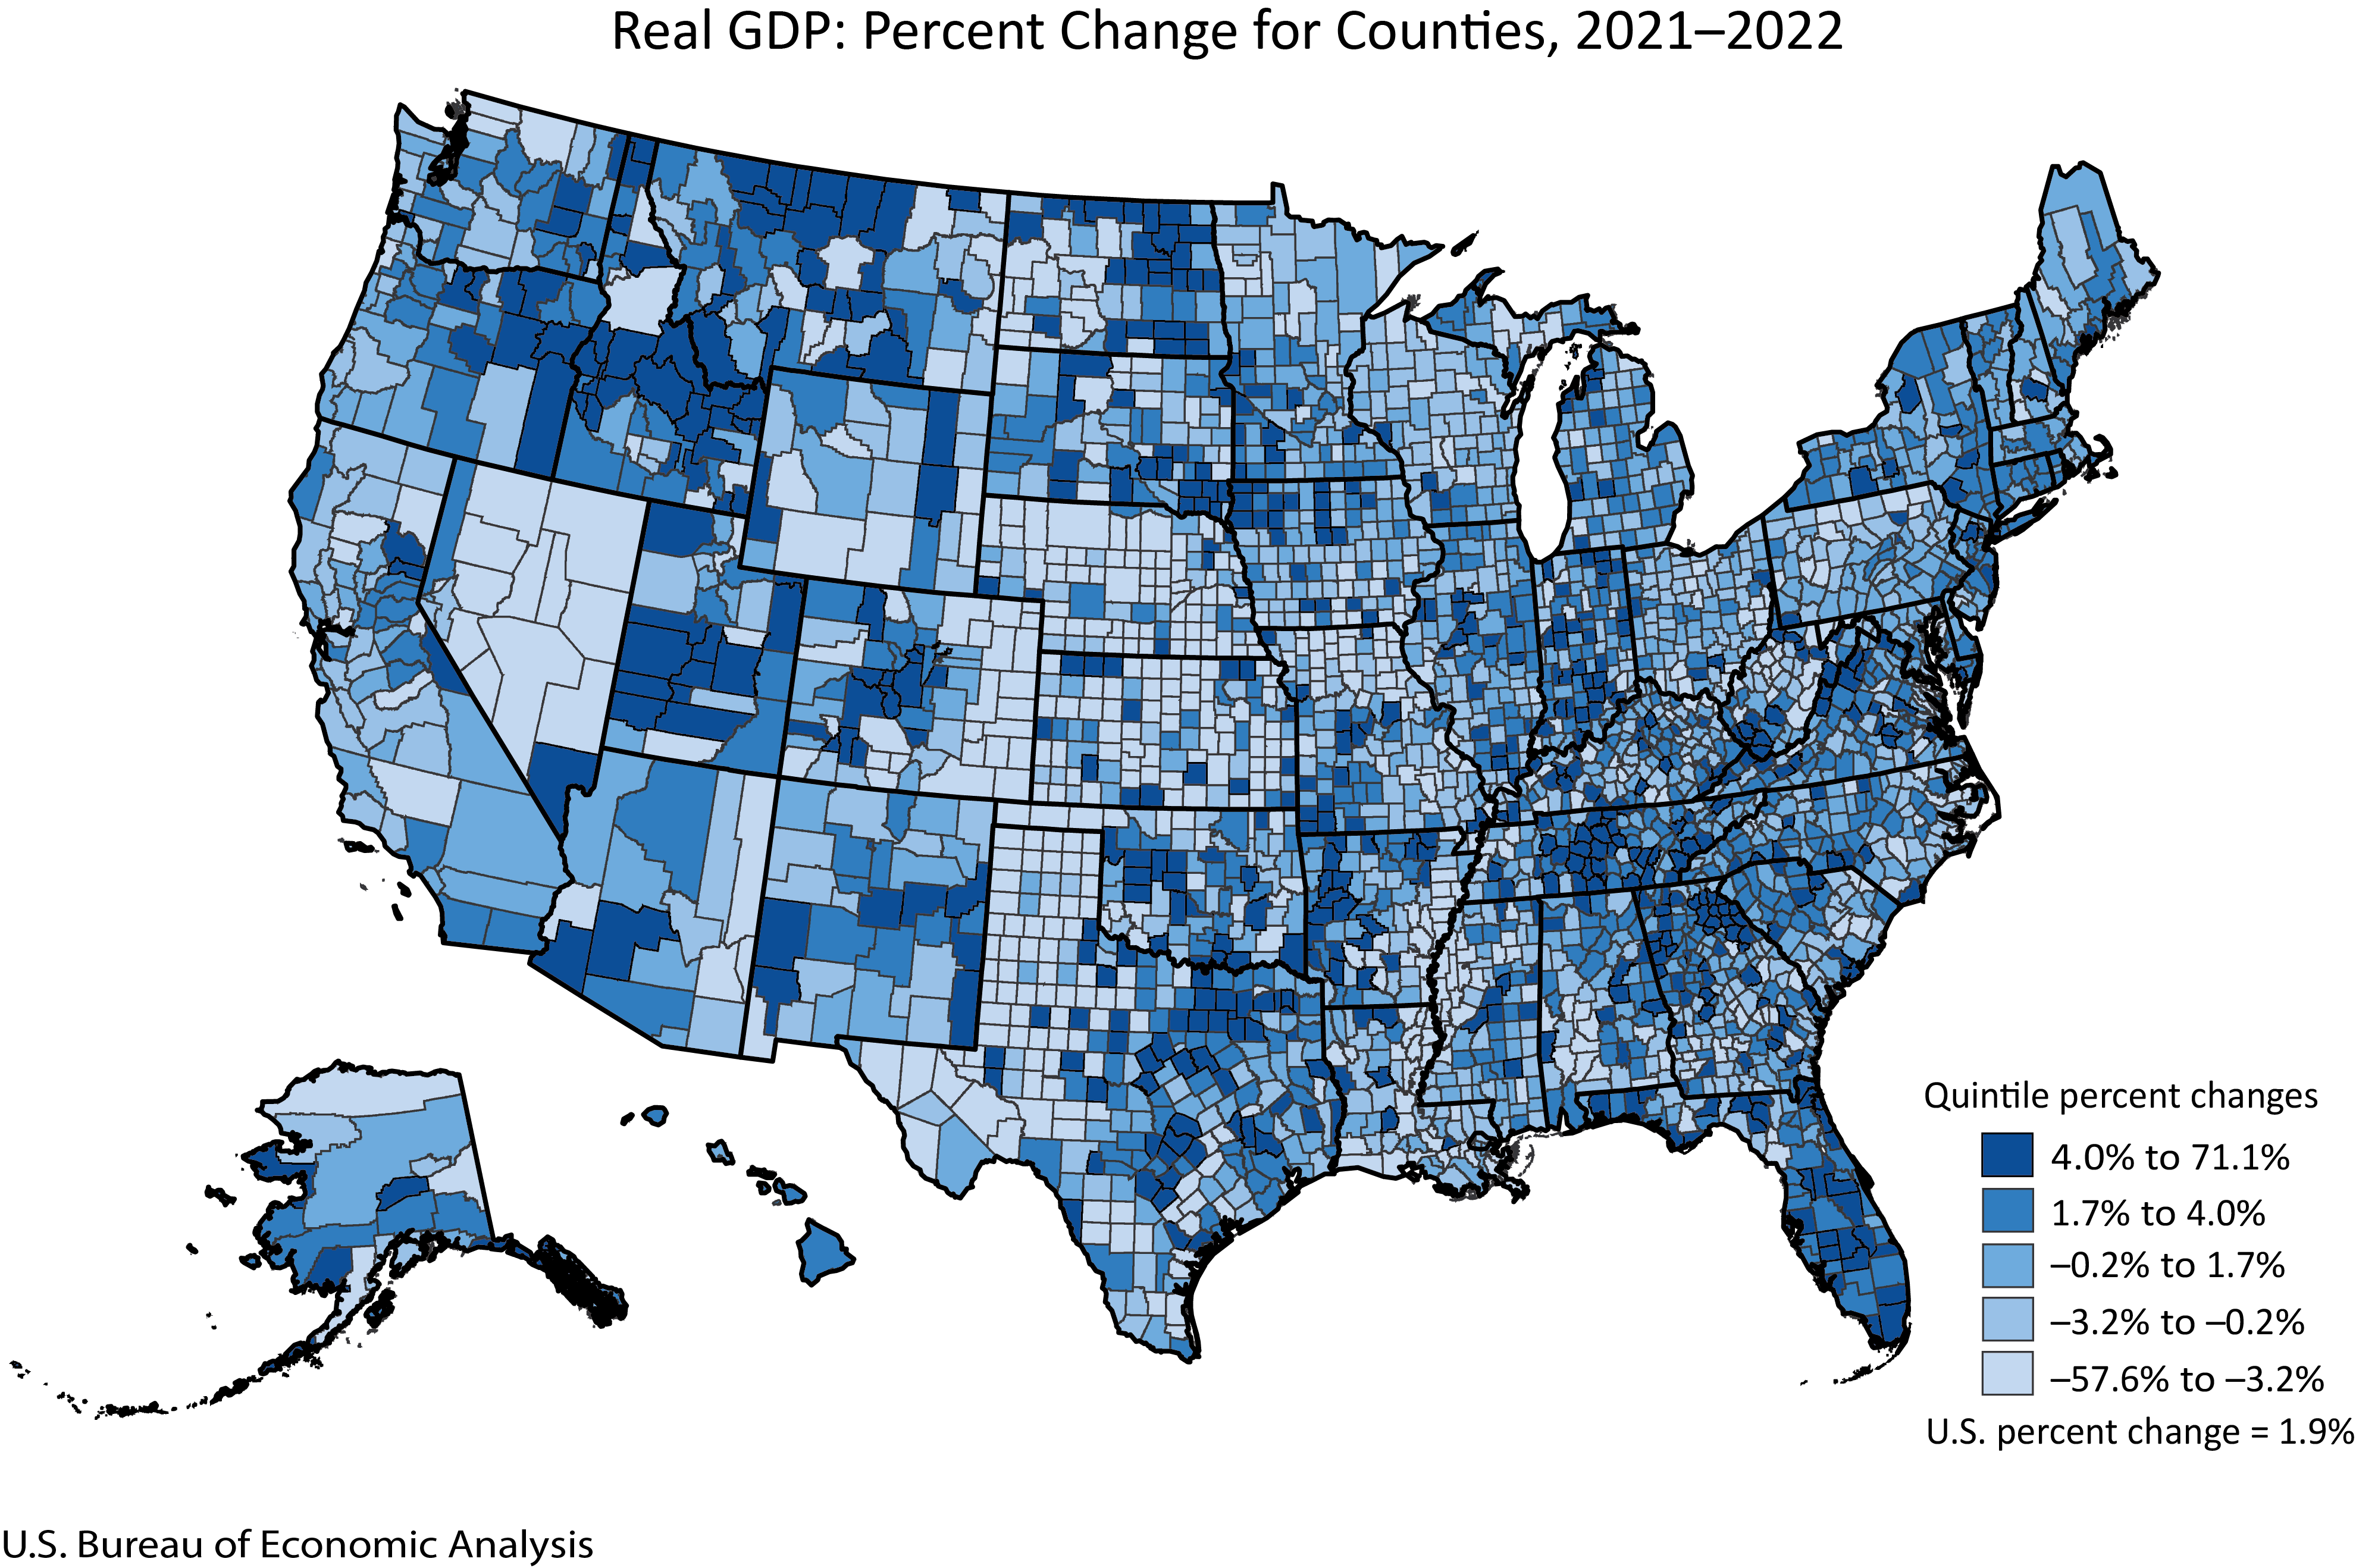 Real GDP: Percent Change for Counties, 2021-2022